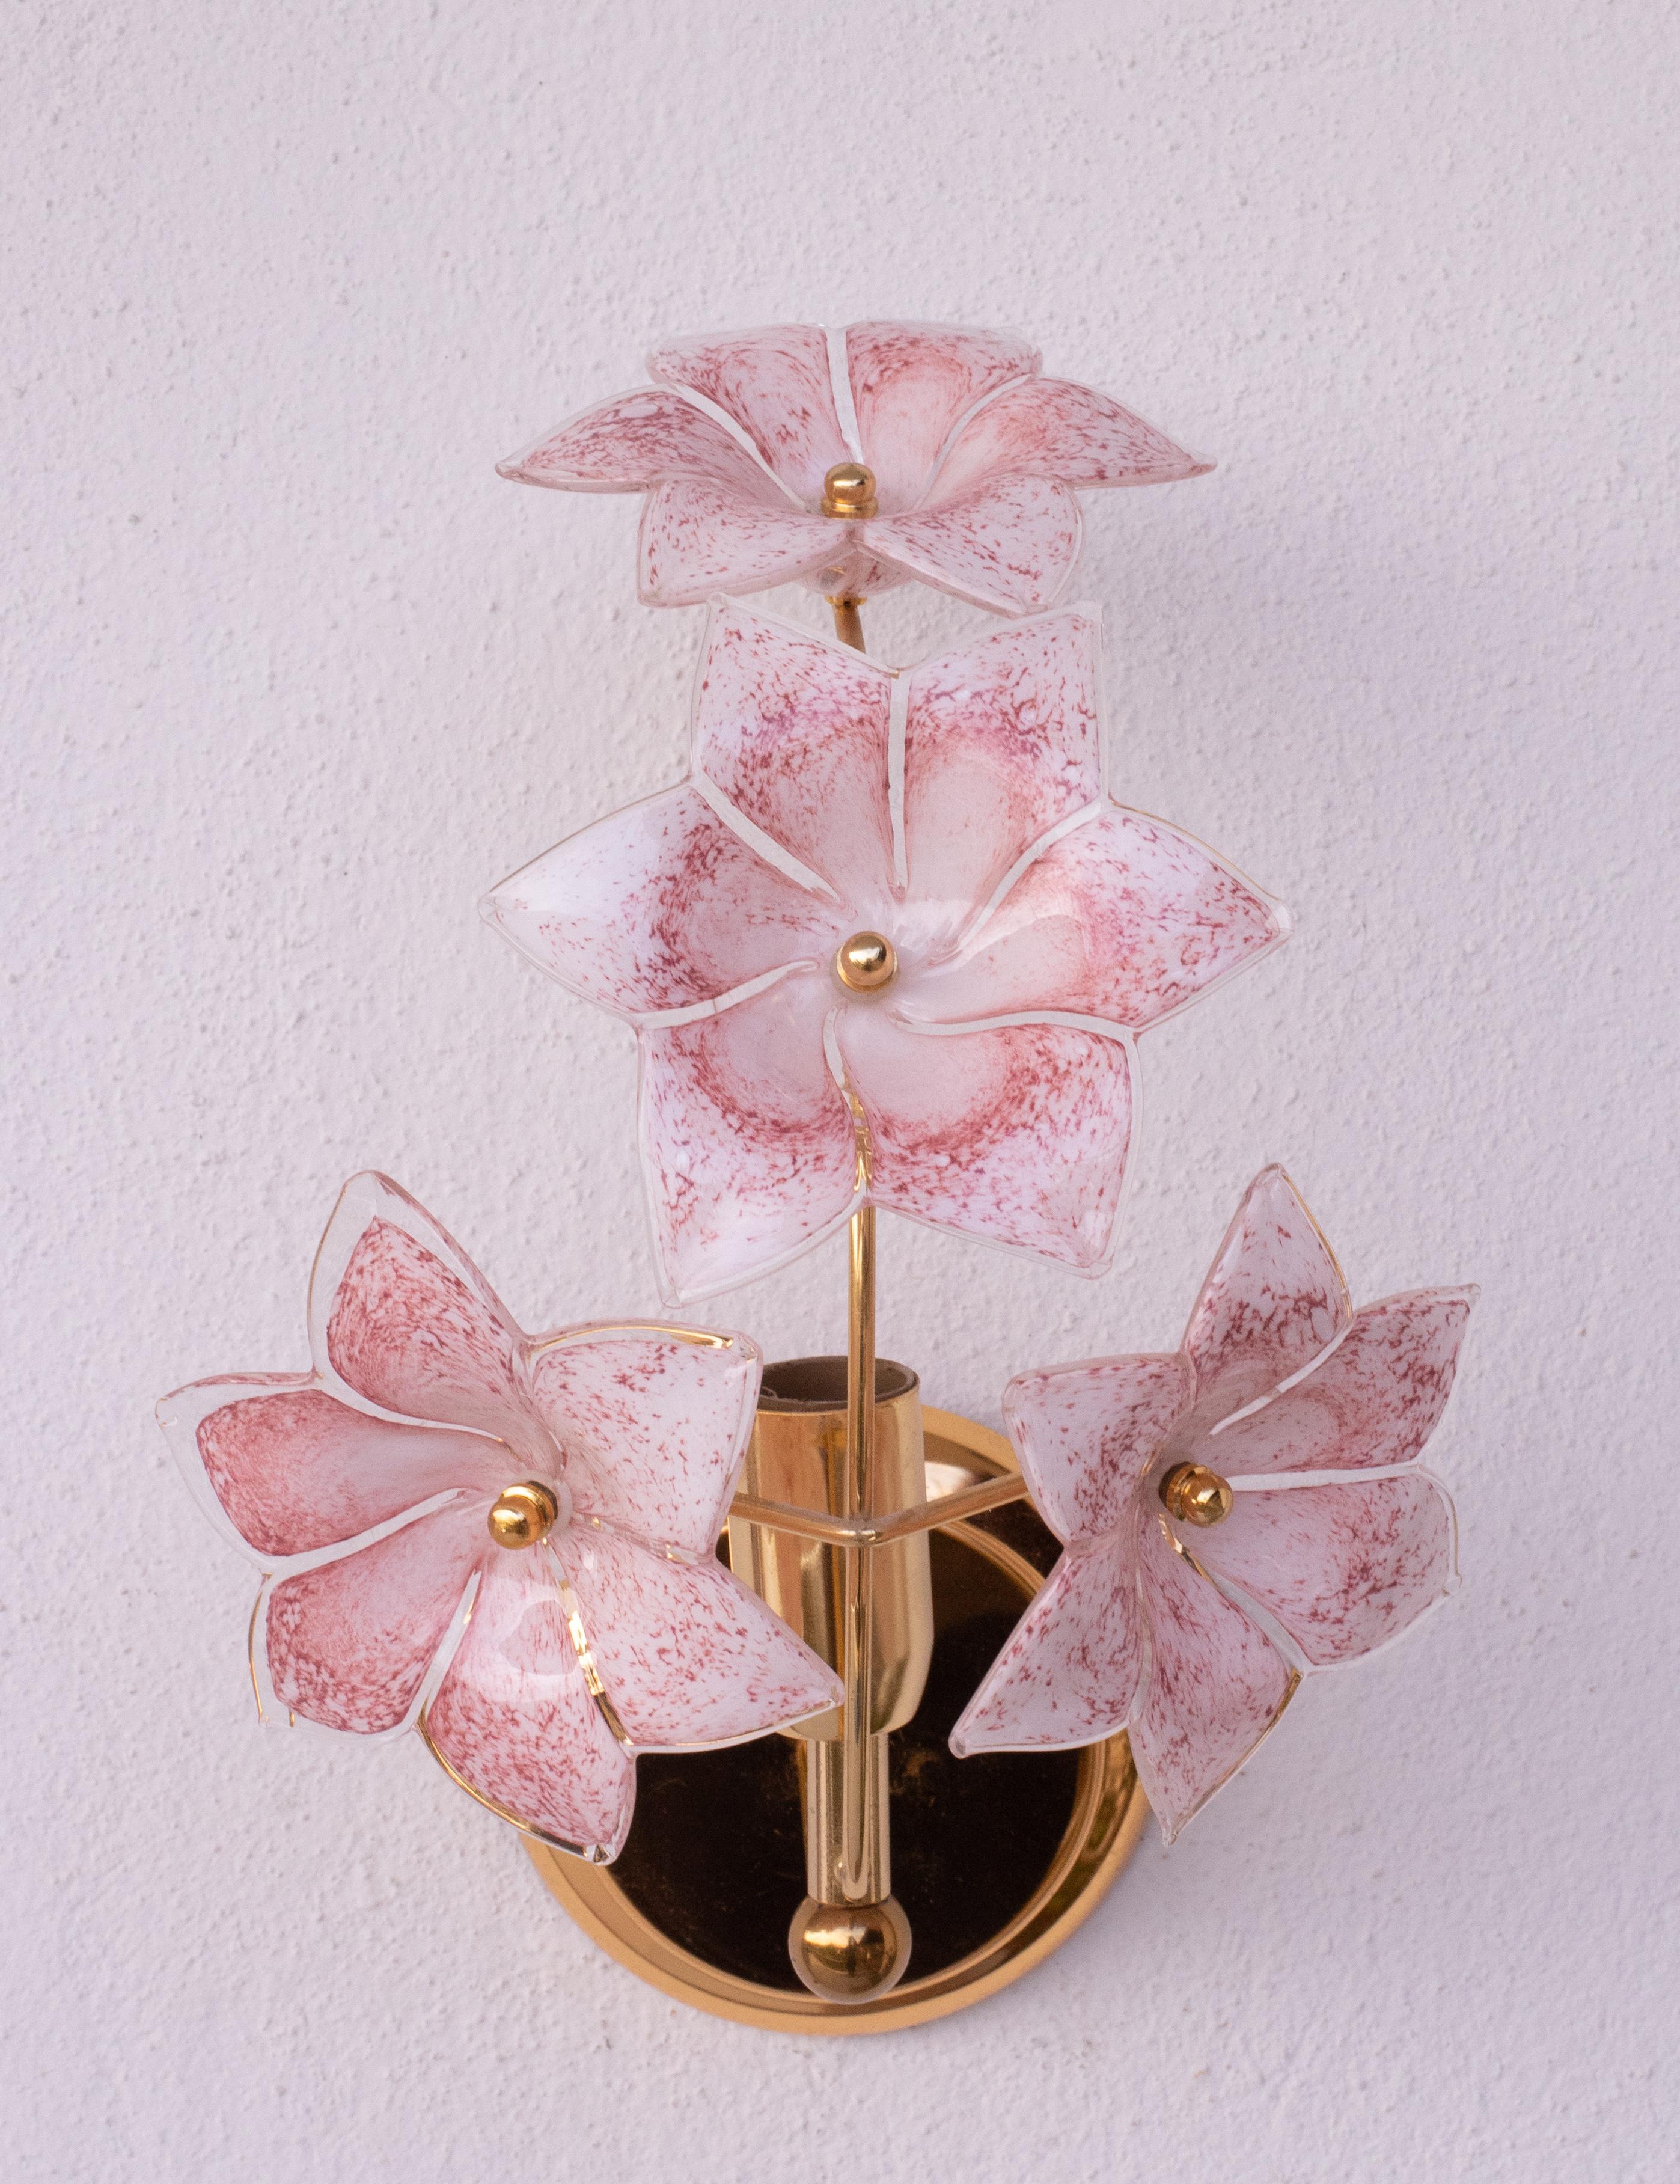 Pretty pair of wall light with Murano glass pink flowers.
Accommodates one E14 screw-in bulbs, European standards, possible replace for Us standard.
Measurements:
23 cm width
Height 28 cm
20 cm depth